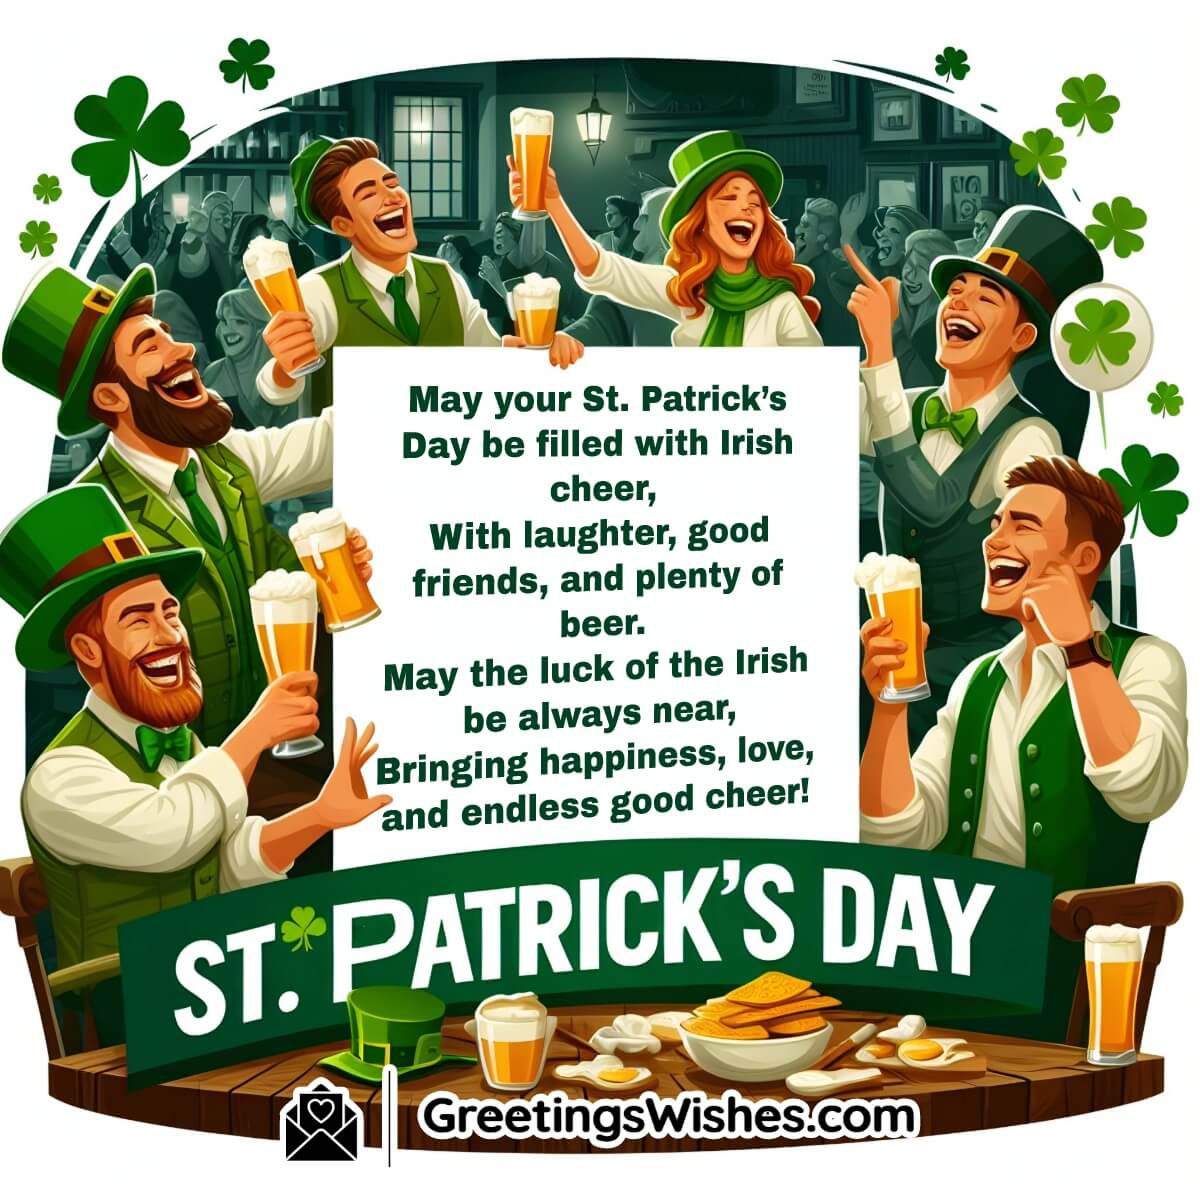 St. Patrick’s Day Messages